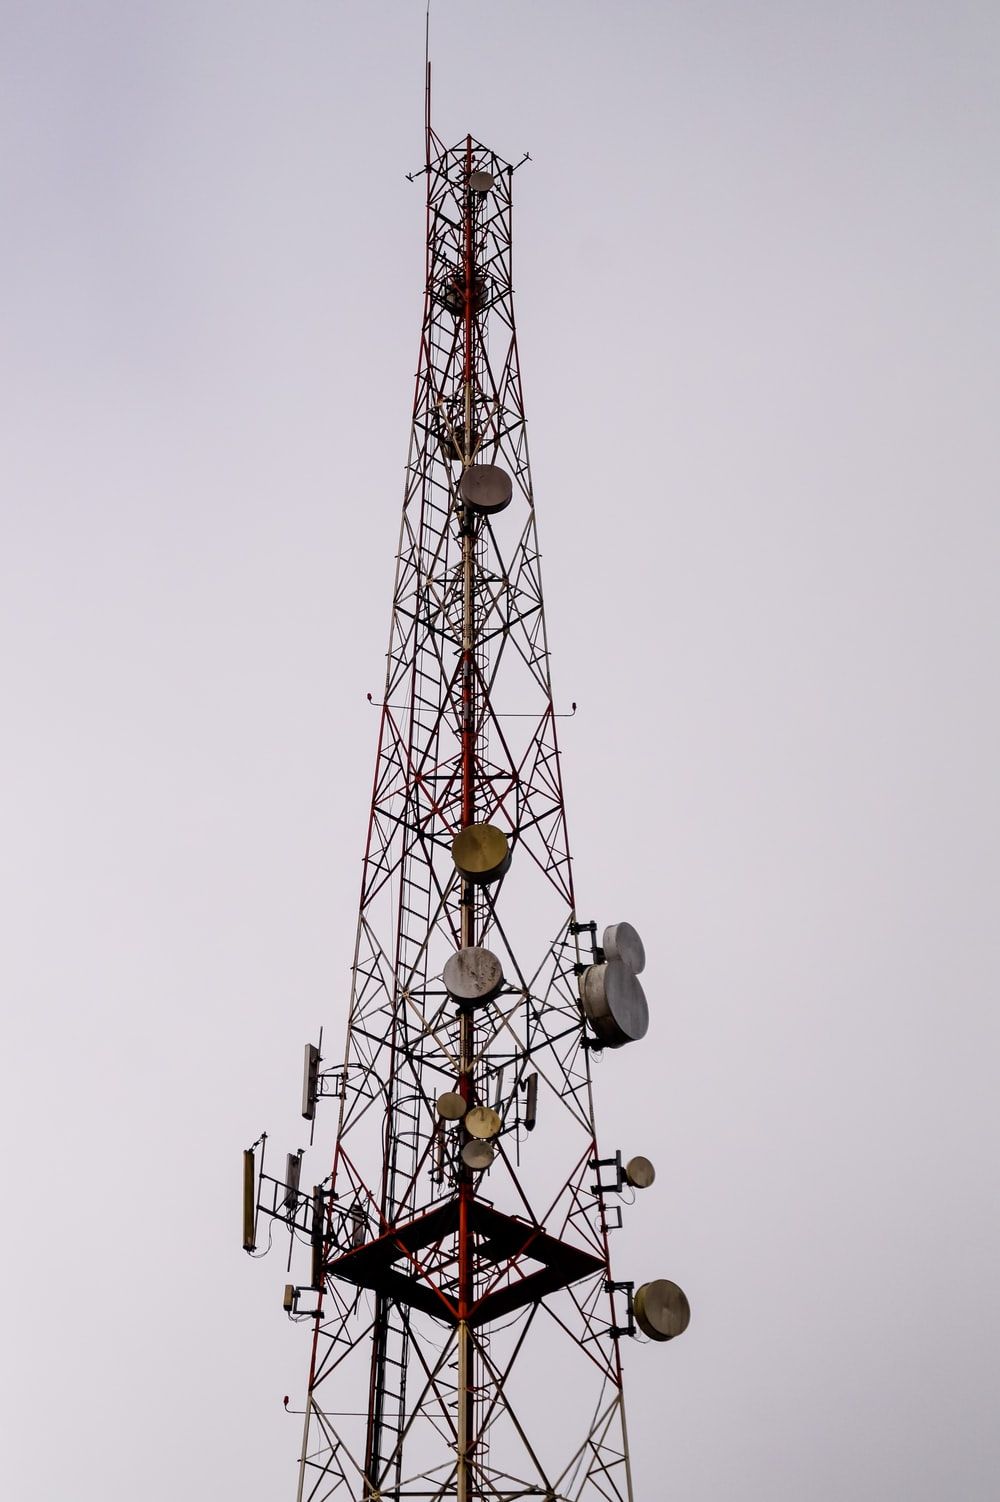 Telecom Picture [HD]. Download Free Image